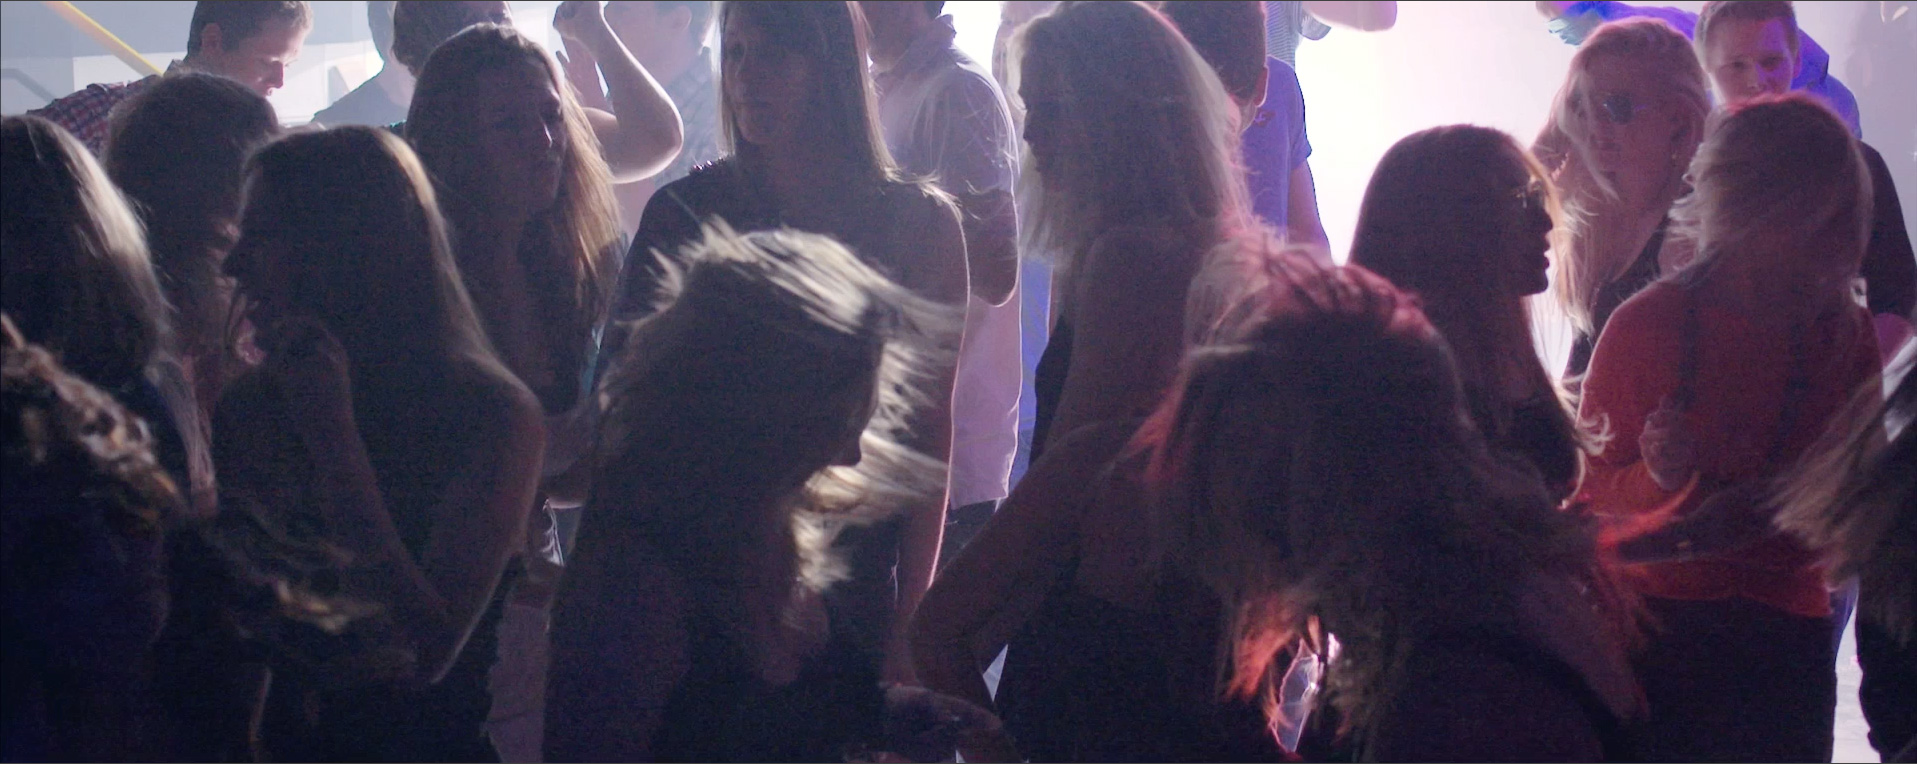 The best global shutter test: strobe light in a club, in slow motion (50 and 60fps)